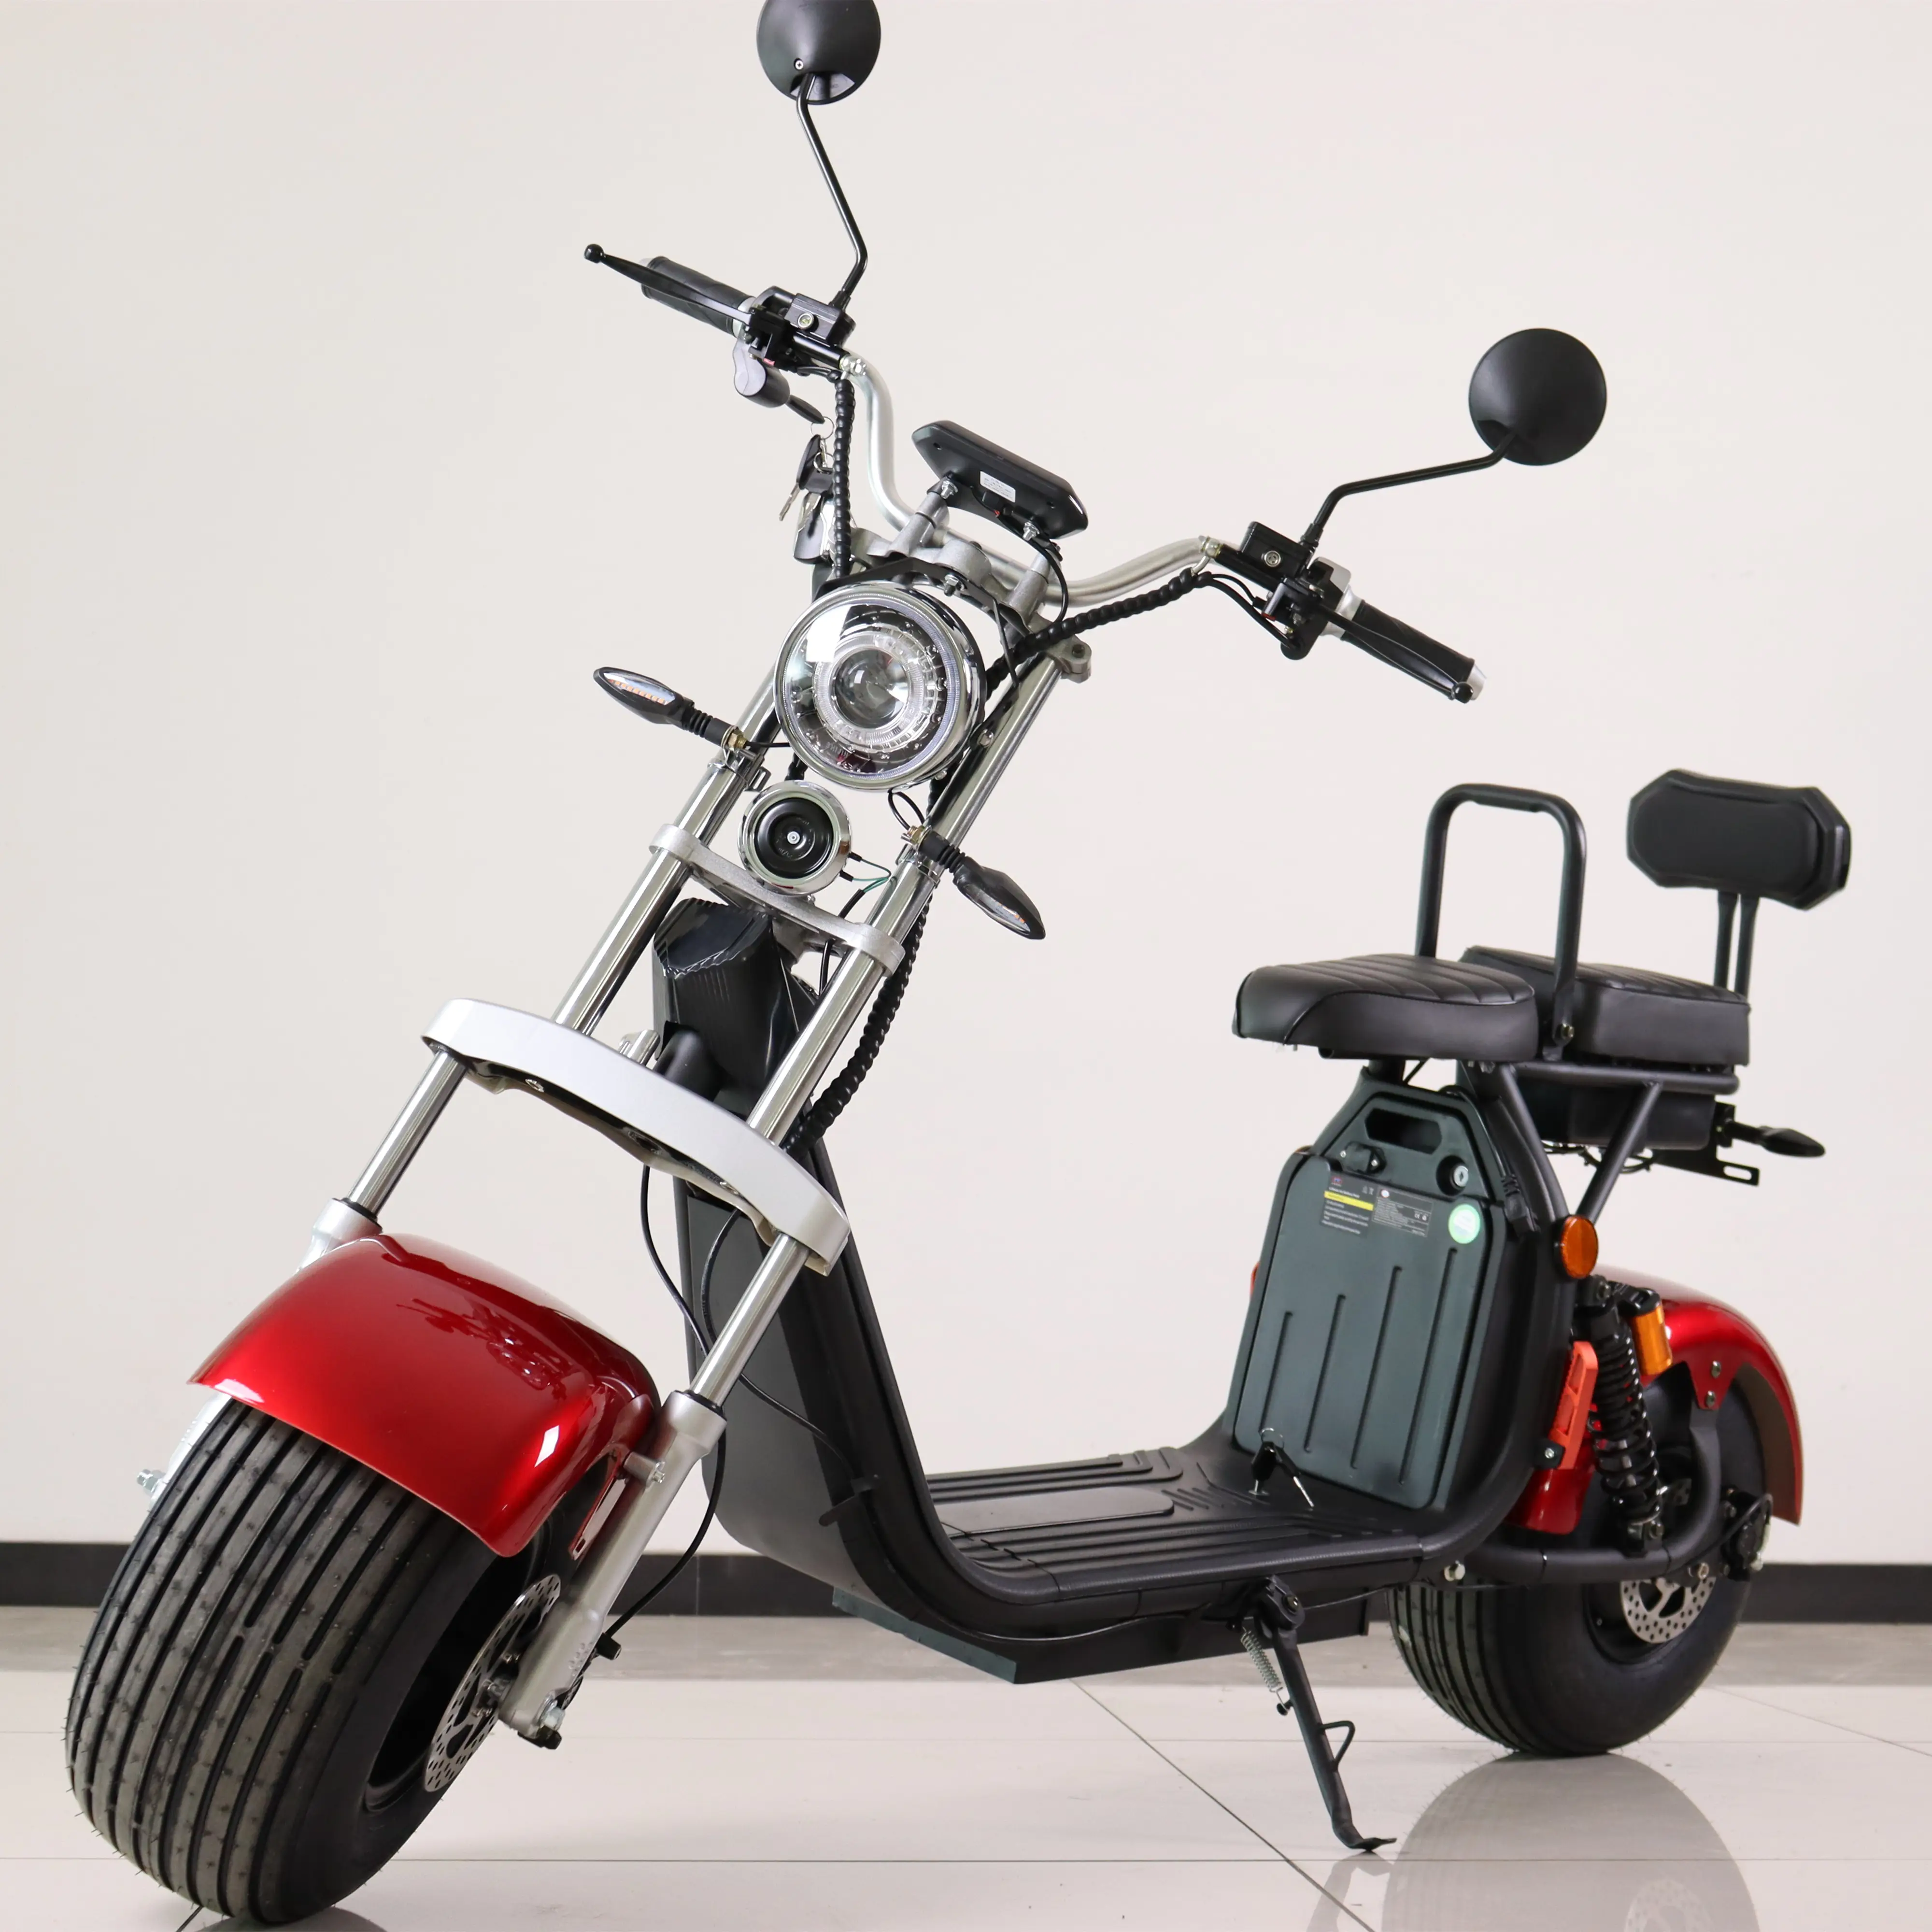 2022 Hot china cheap 1500W 2000W 3000W fat tire electric scooter eec coc citycoco scooter 60V 45km/h 60km/h